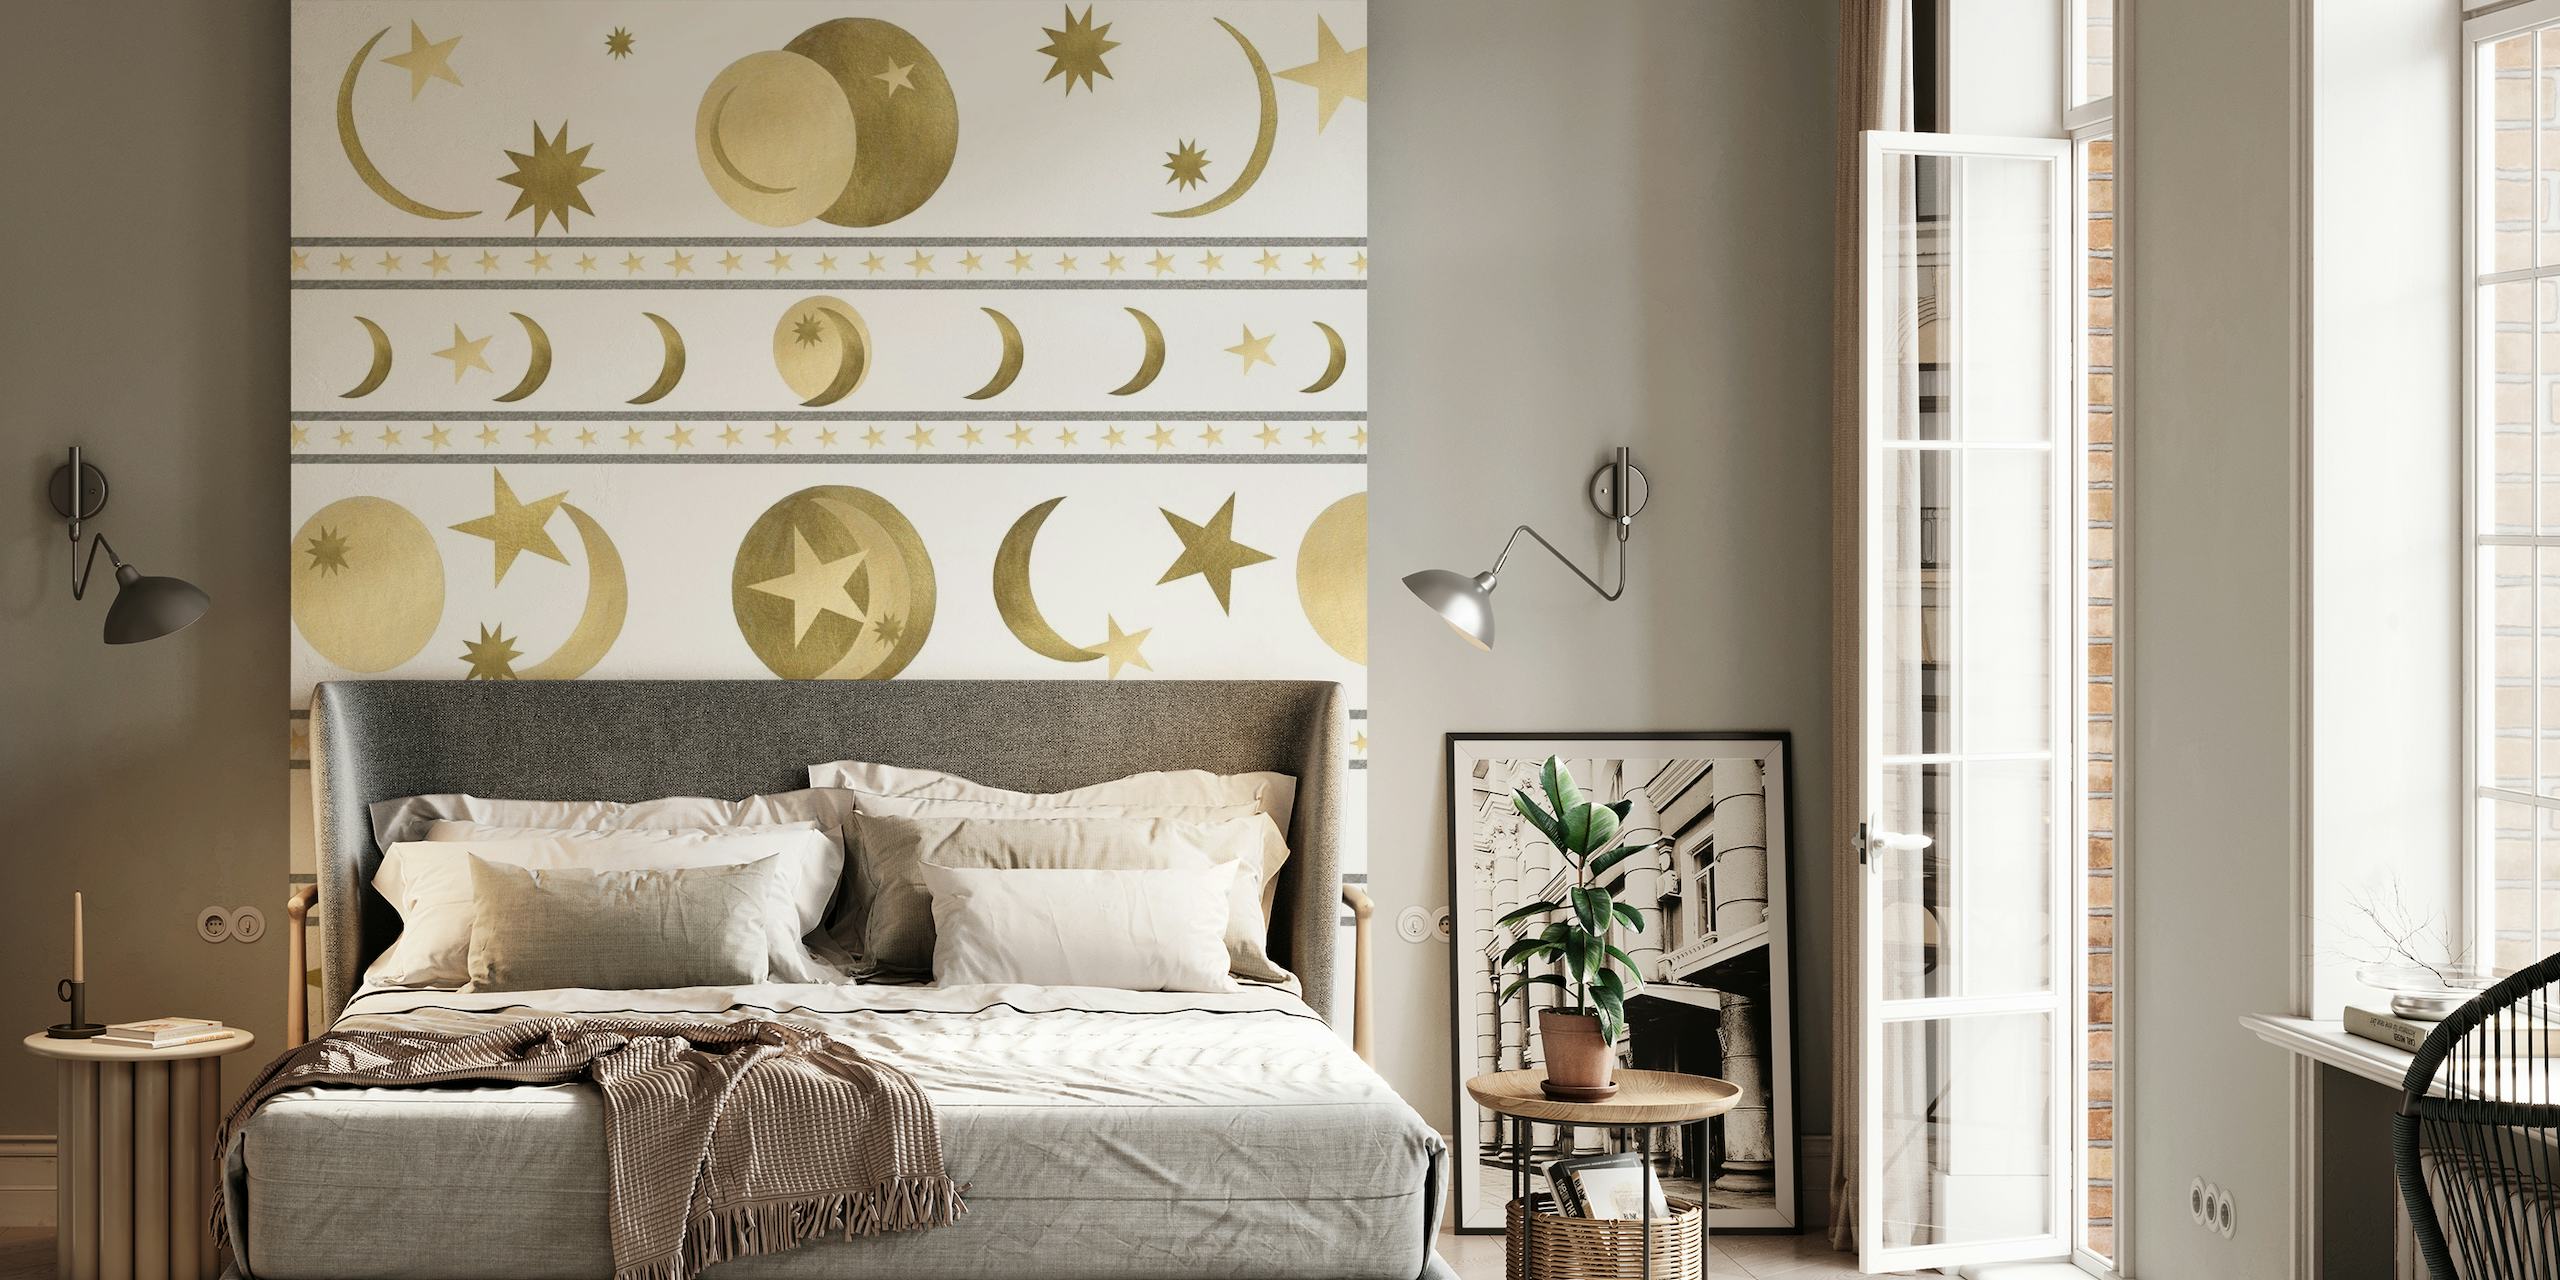 Dreamy golden celestial bodies on stripes wall mural